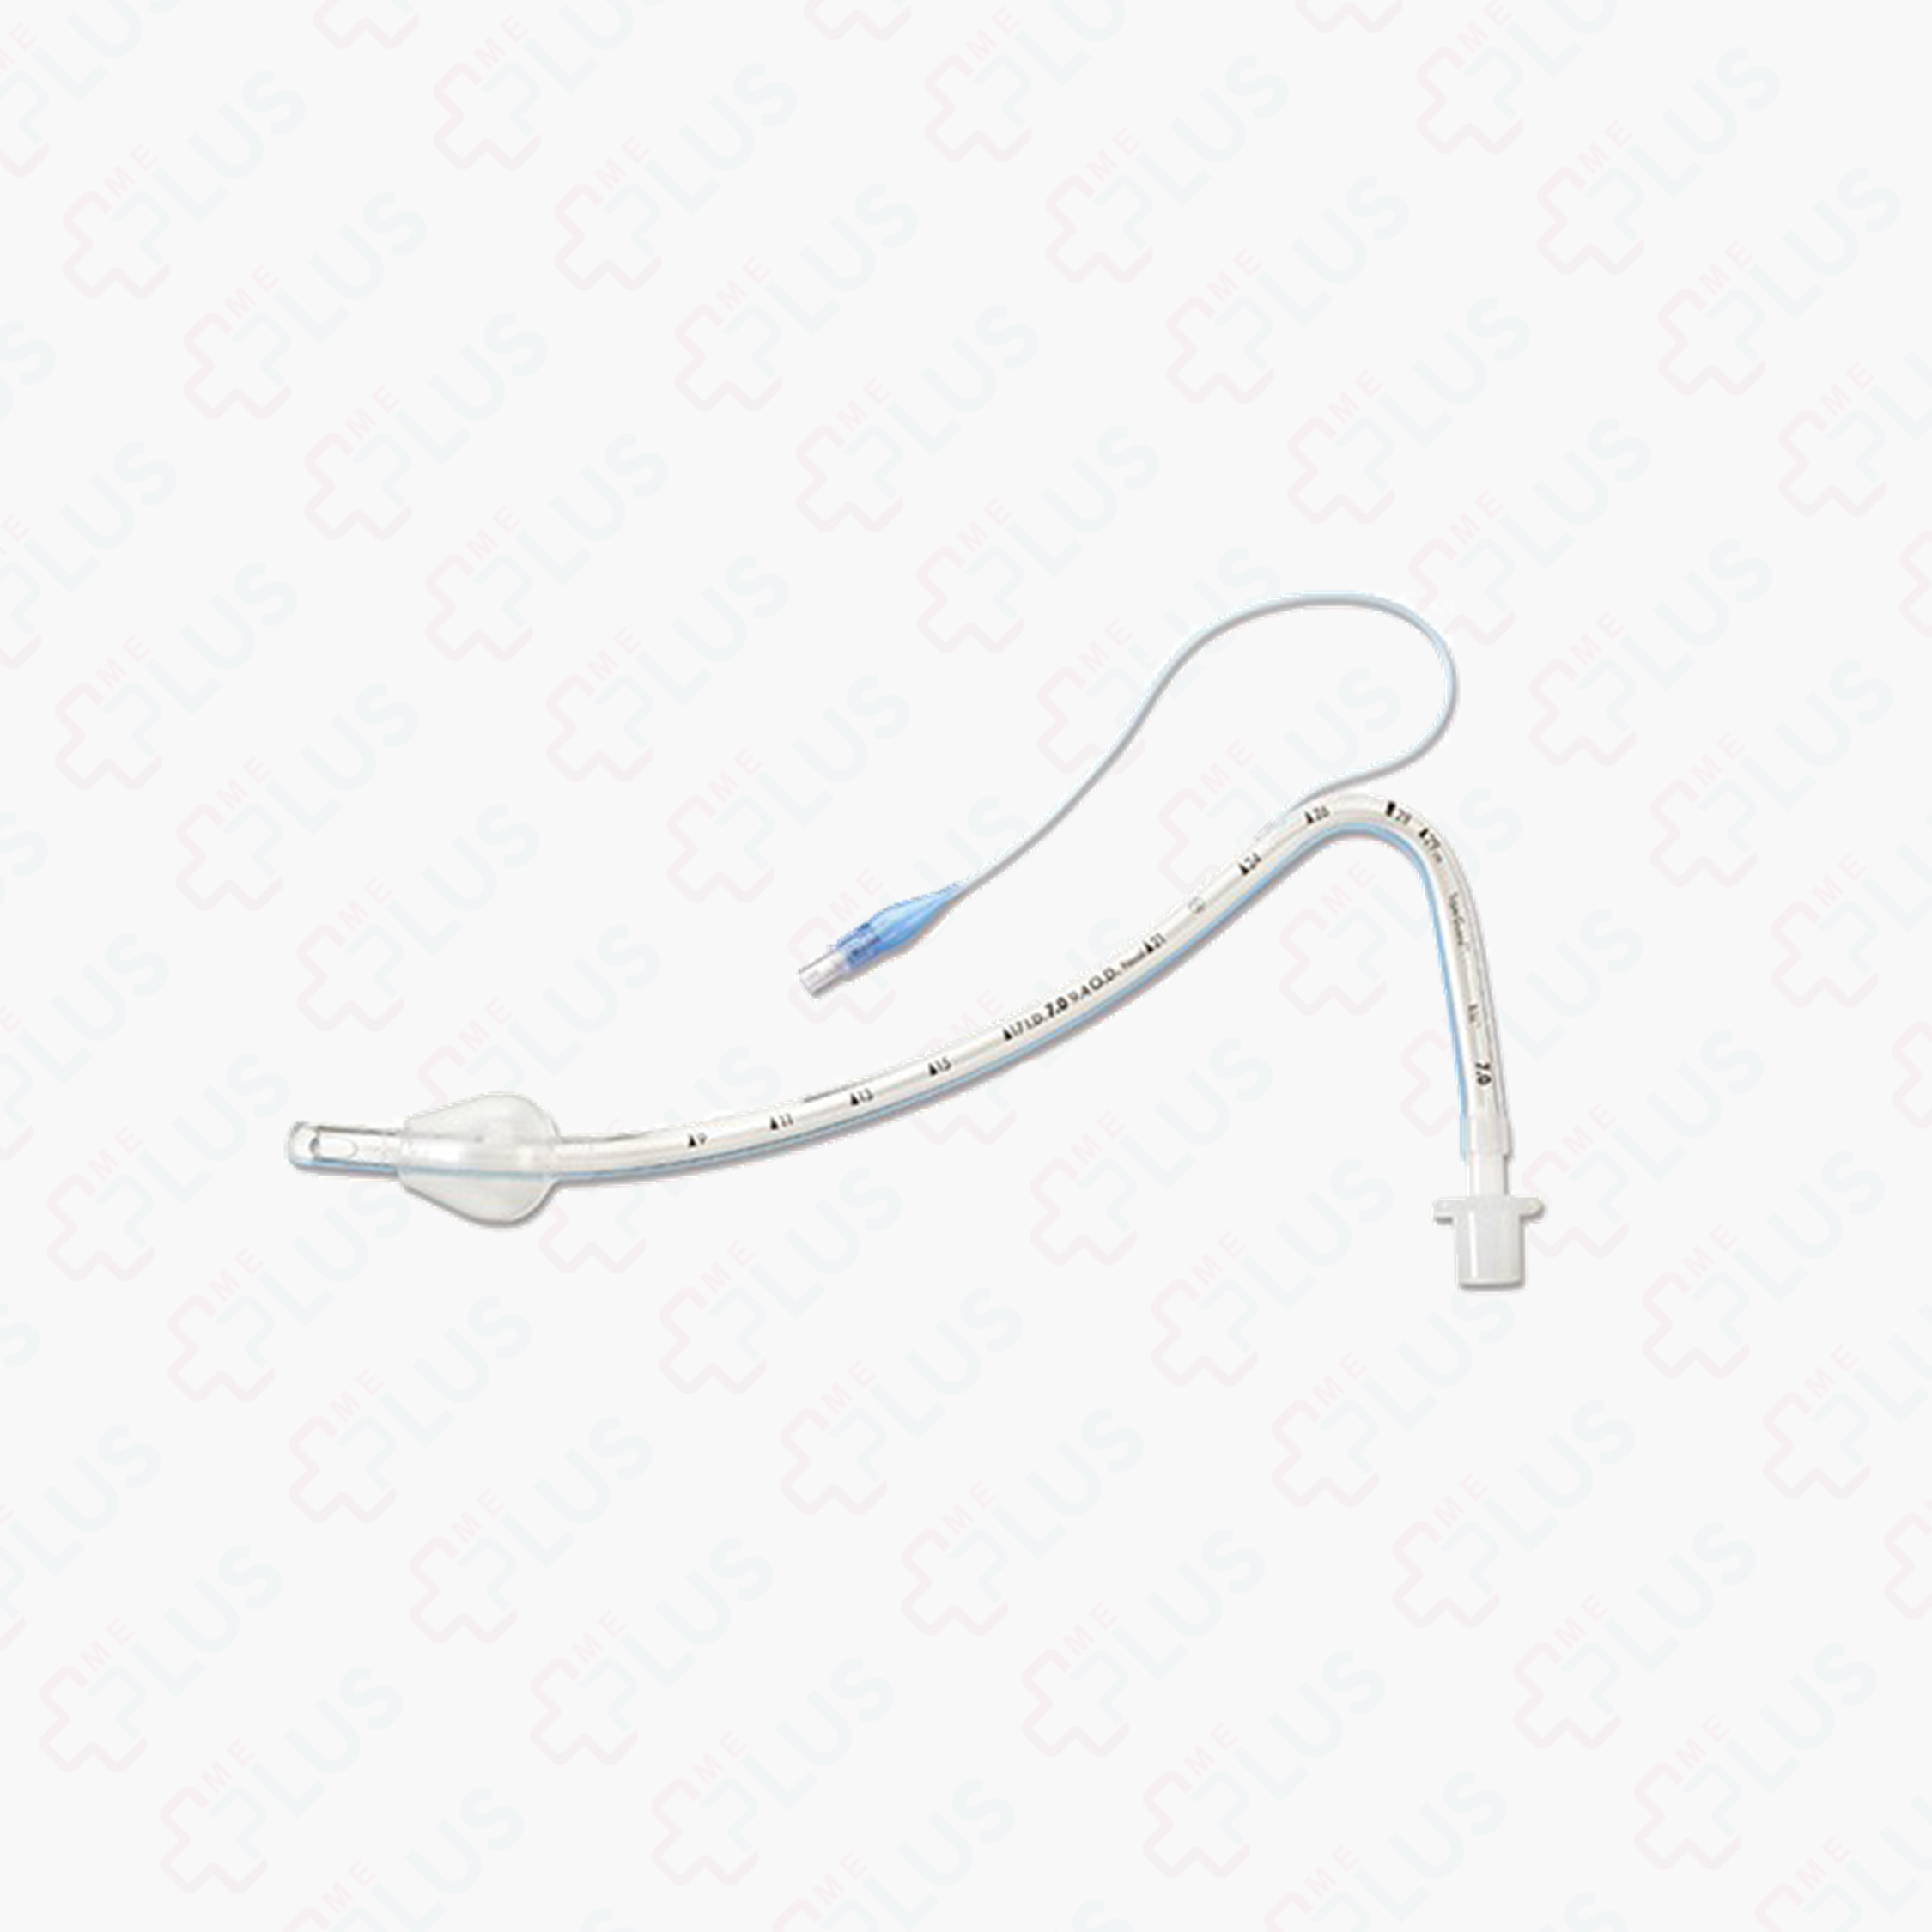 Shiley™ Oral and Nasal RAE Endotracheal Tubes with TaperGuard™ Cuff